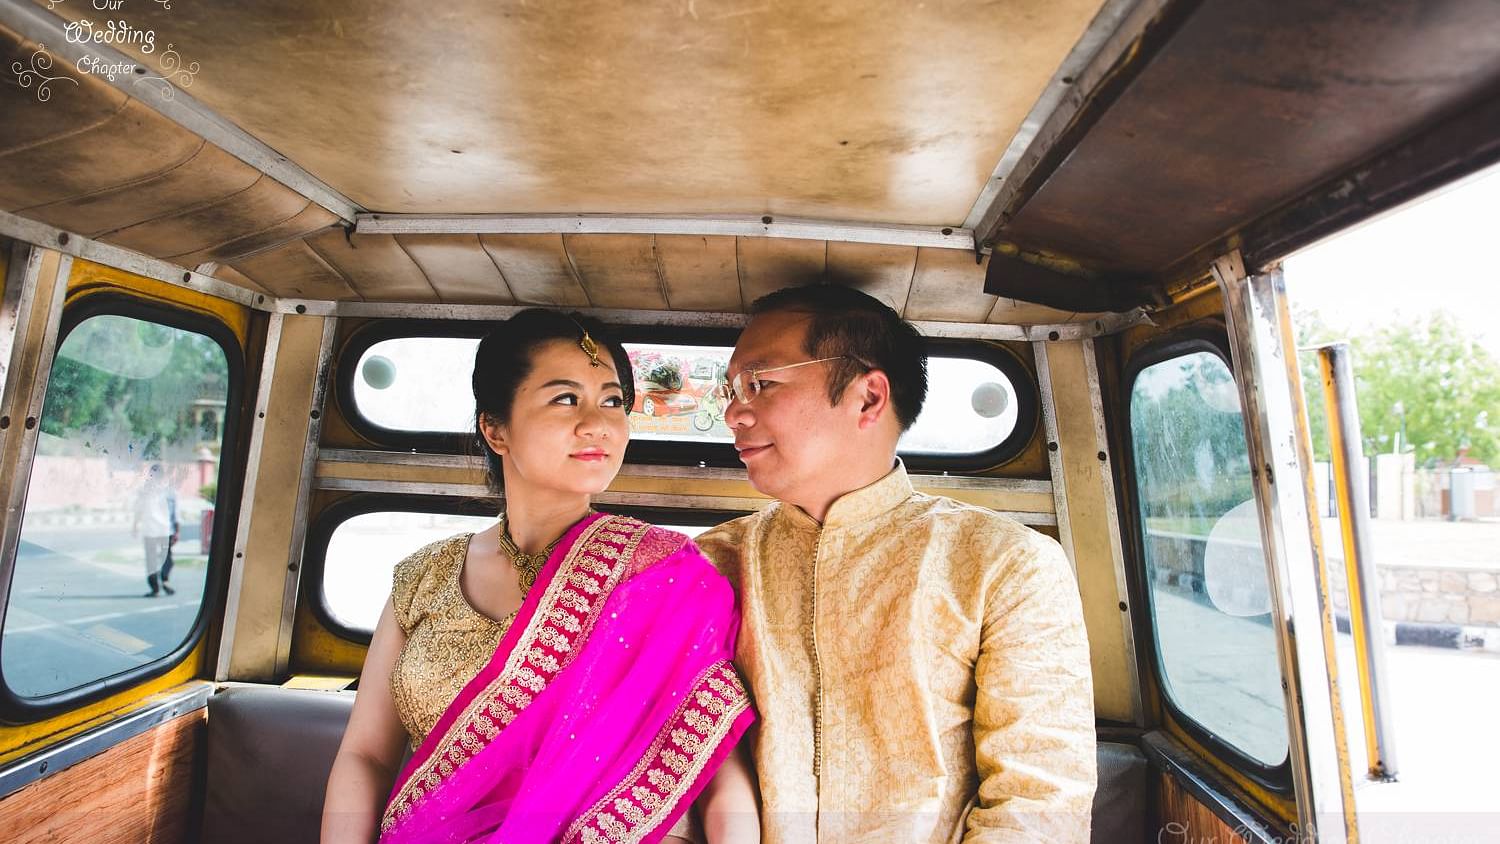 Ling and Zhang, a couple from China posing for their desi photoshoot. (Photo Courtesy: Our Wedding Chapter)